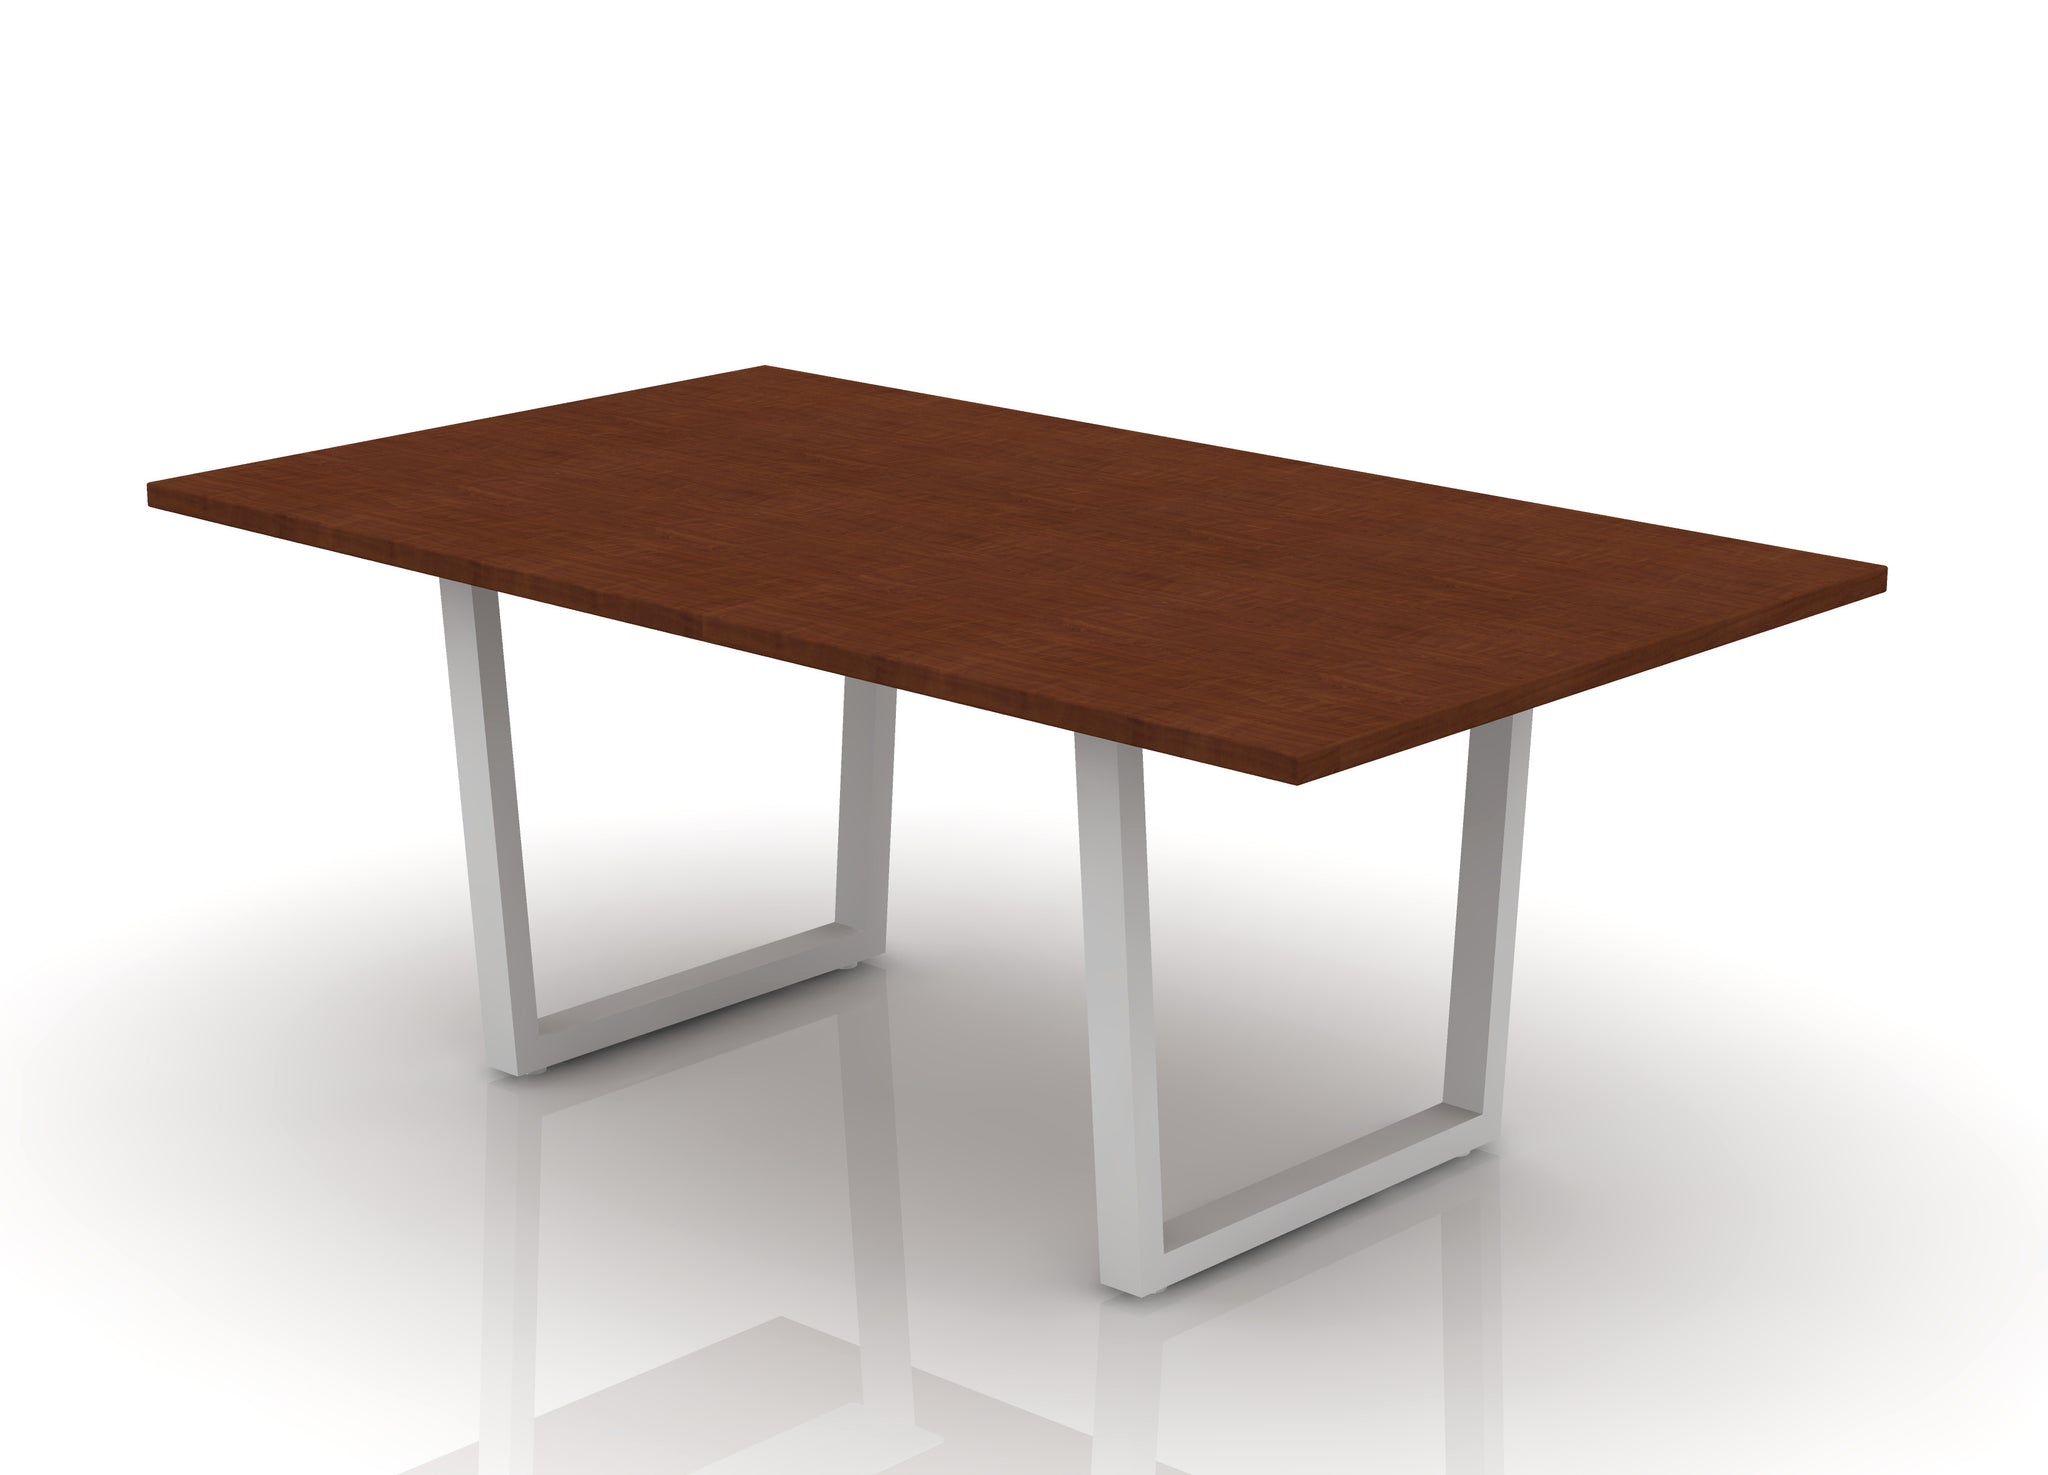 Luxe Conference Tables Series